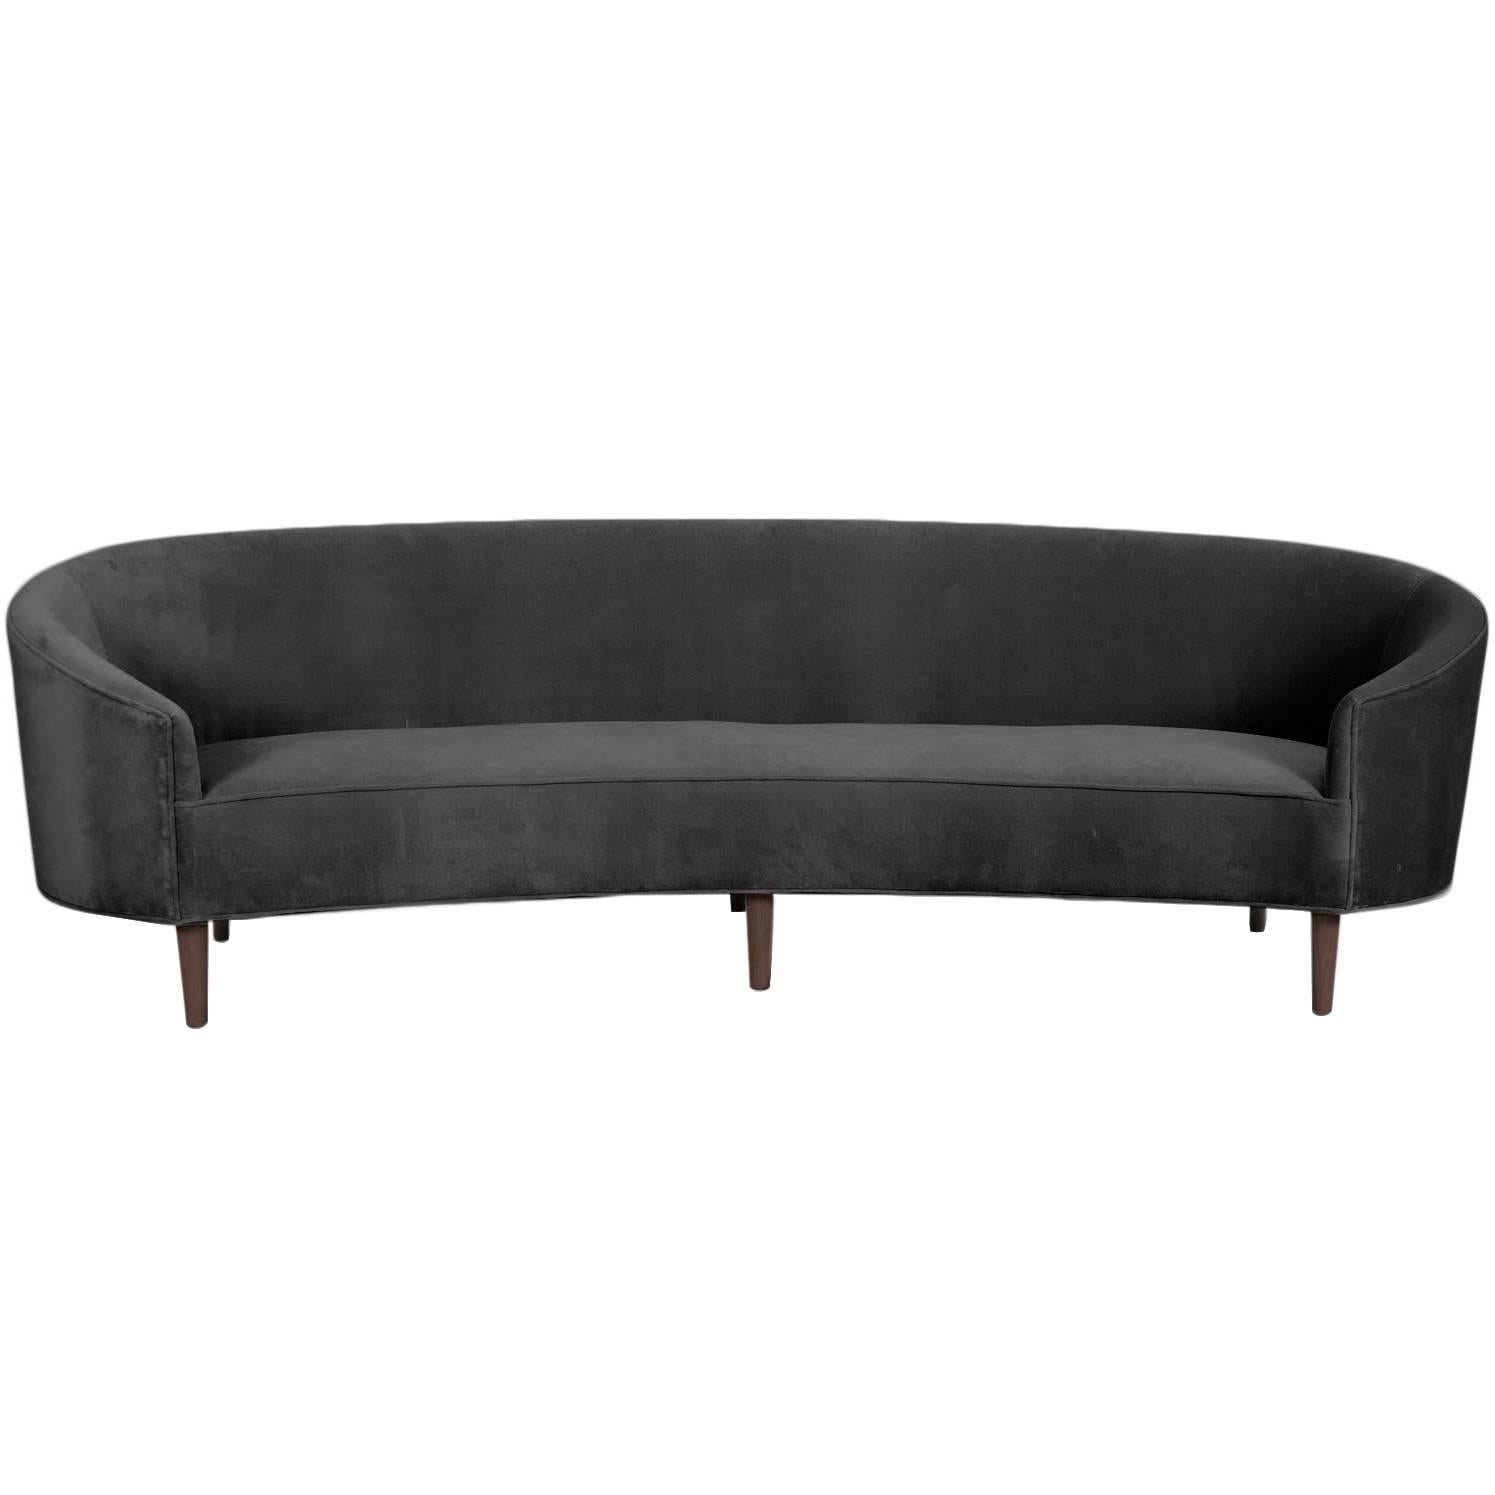 Art Deco Style Crescent Sofa with Walnut Legs in Charcoal Velvet